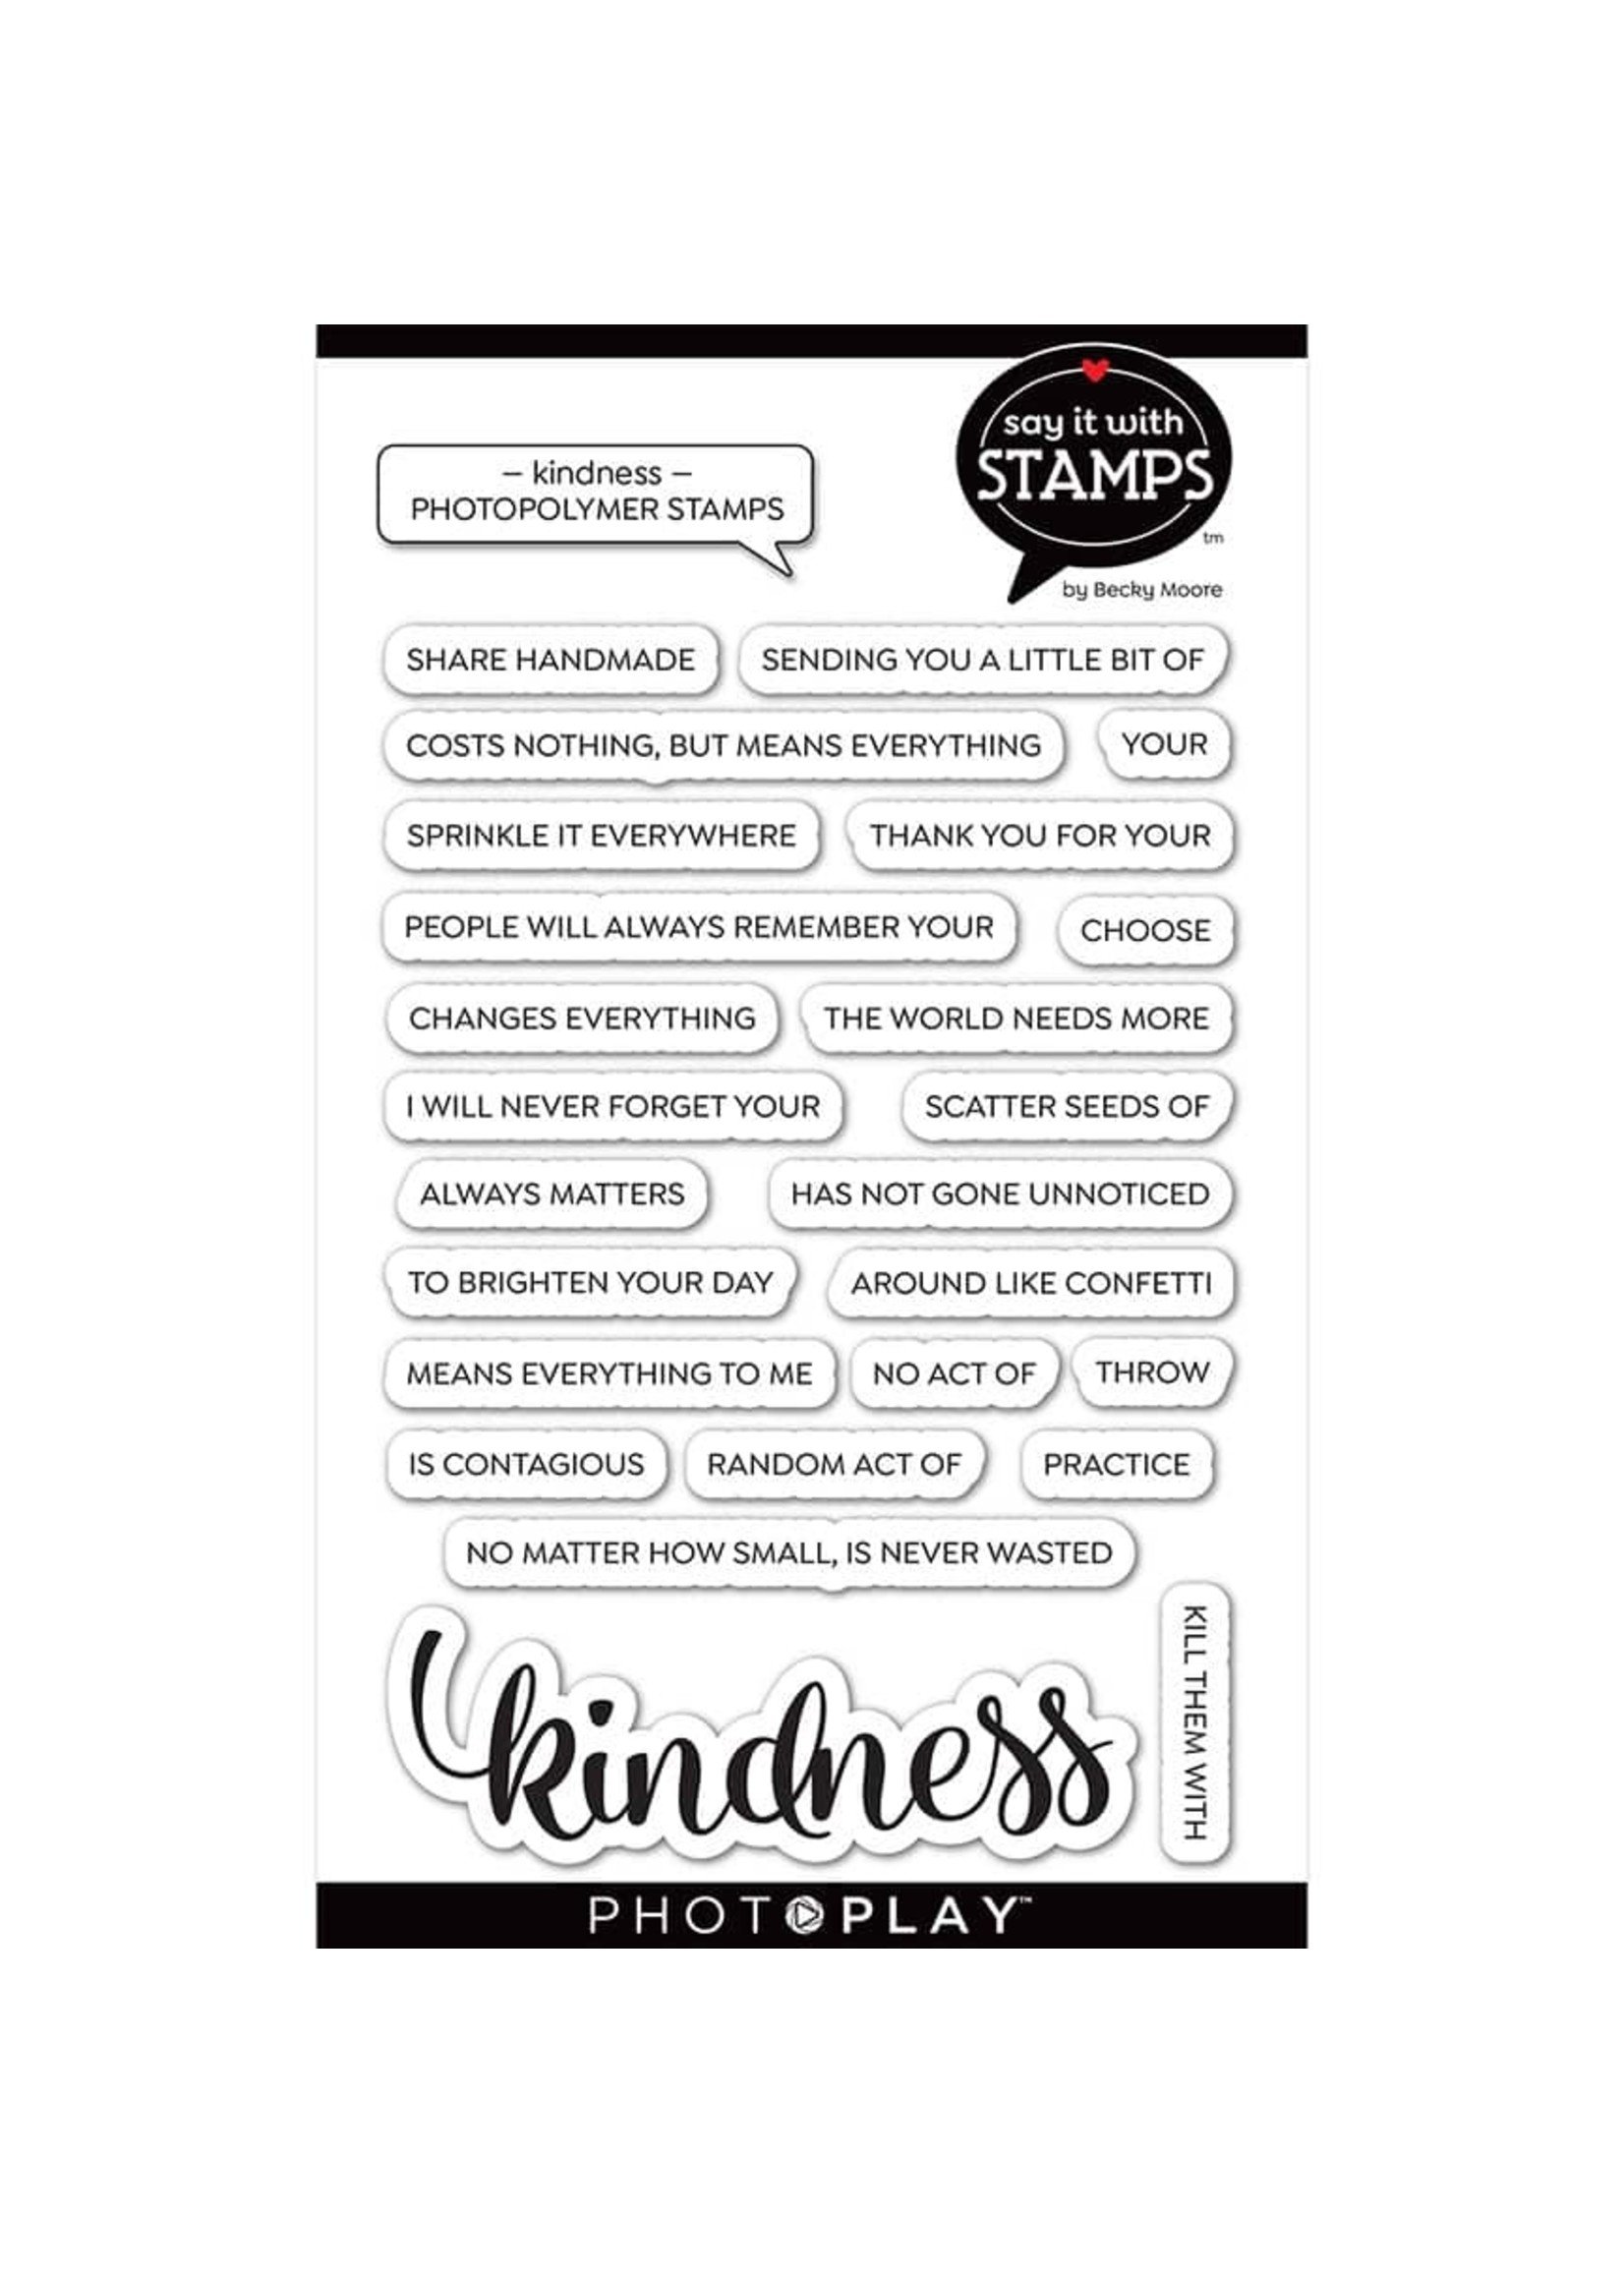 Photoplay Kindness  Stamps